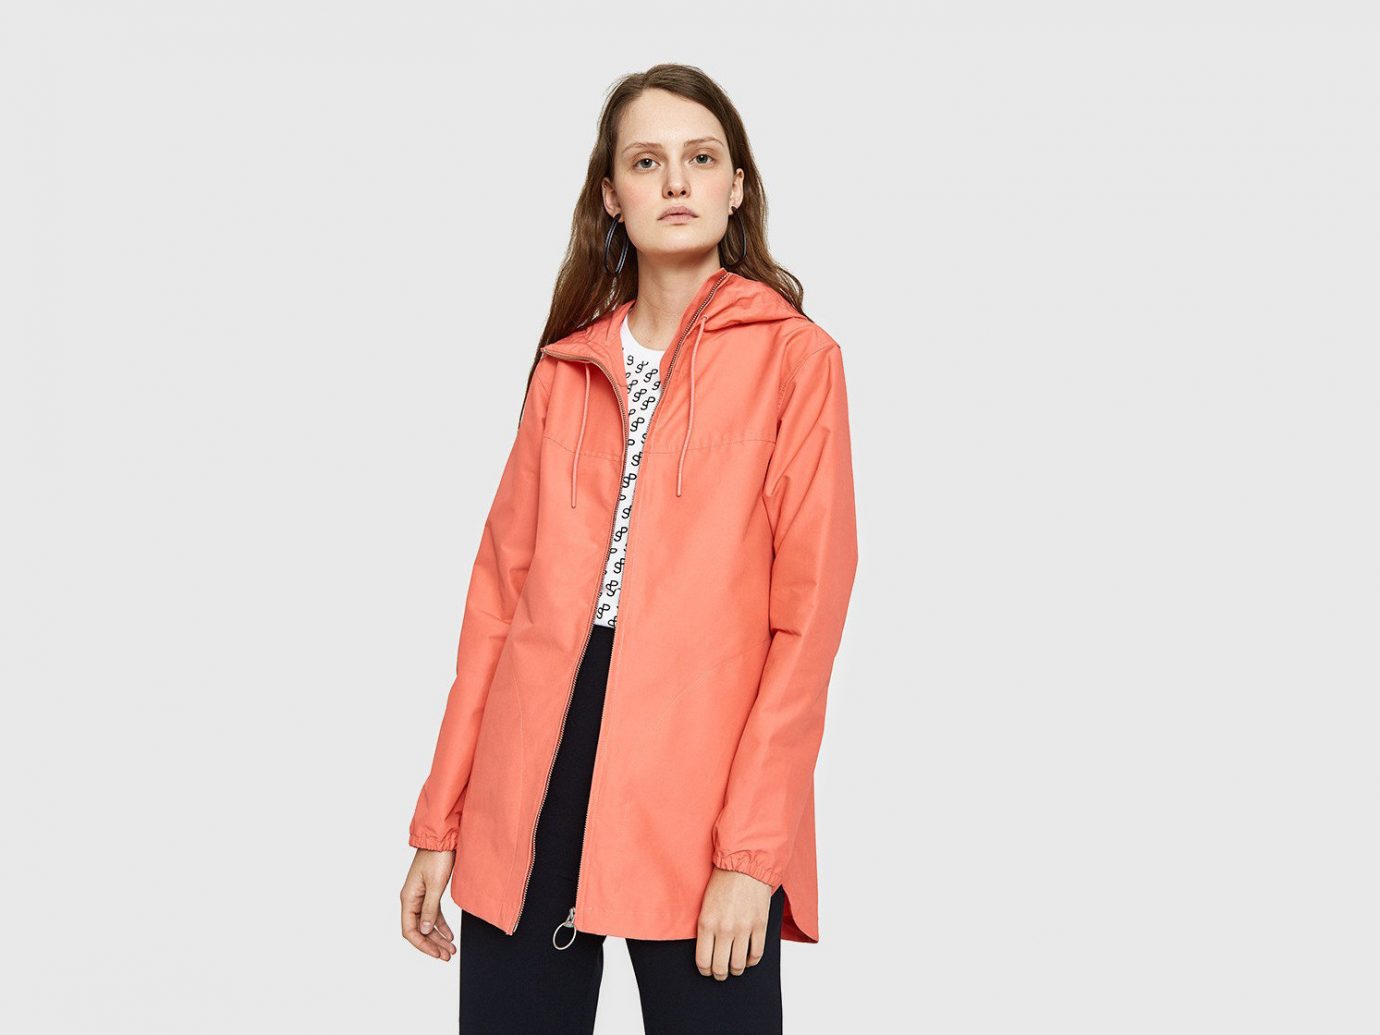 Packing Tips Spring Travel Style + Design Travel Shop clothing suit wearing posing jacket coat shoulder outerwear sleeve peach fashion model dressed neck hood